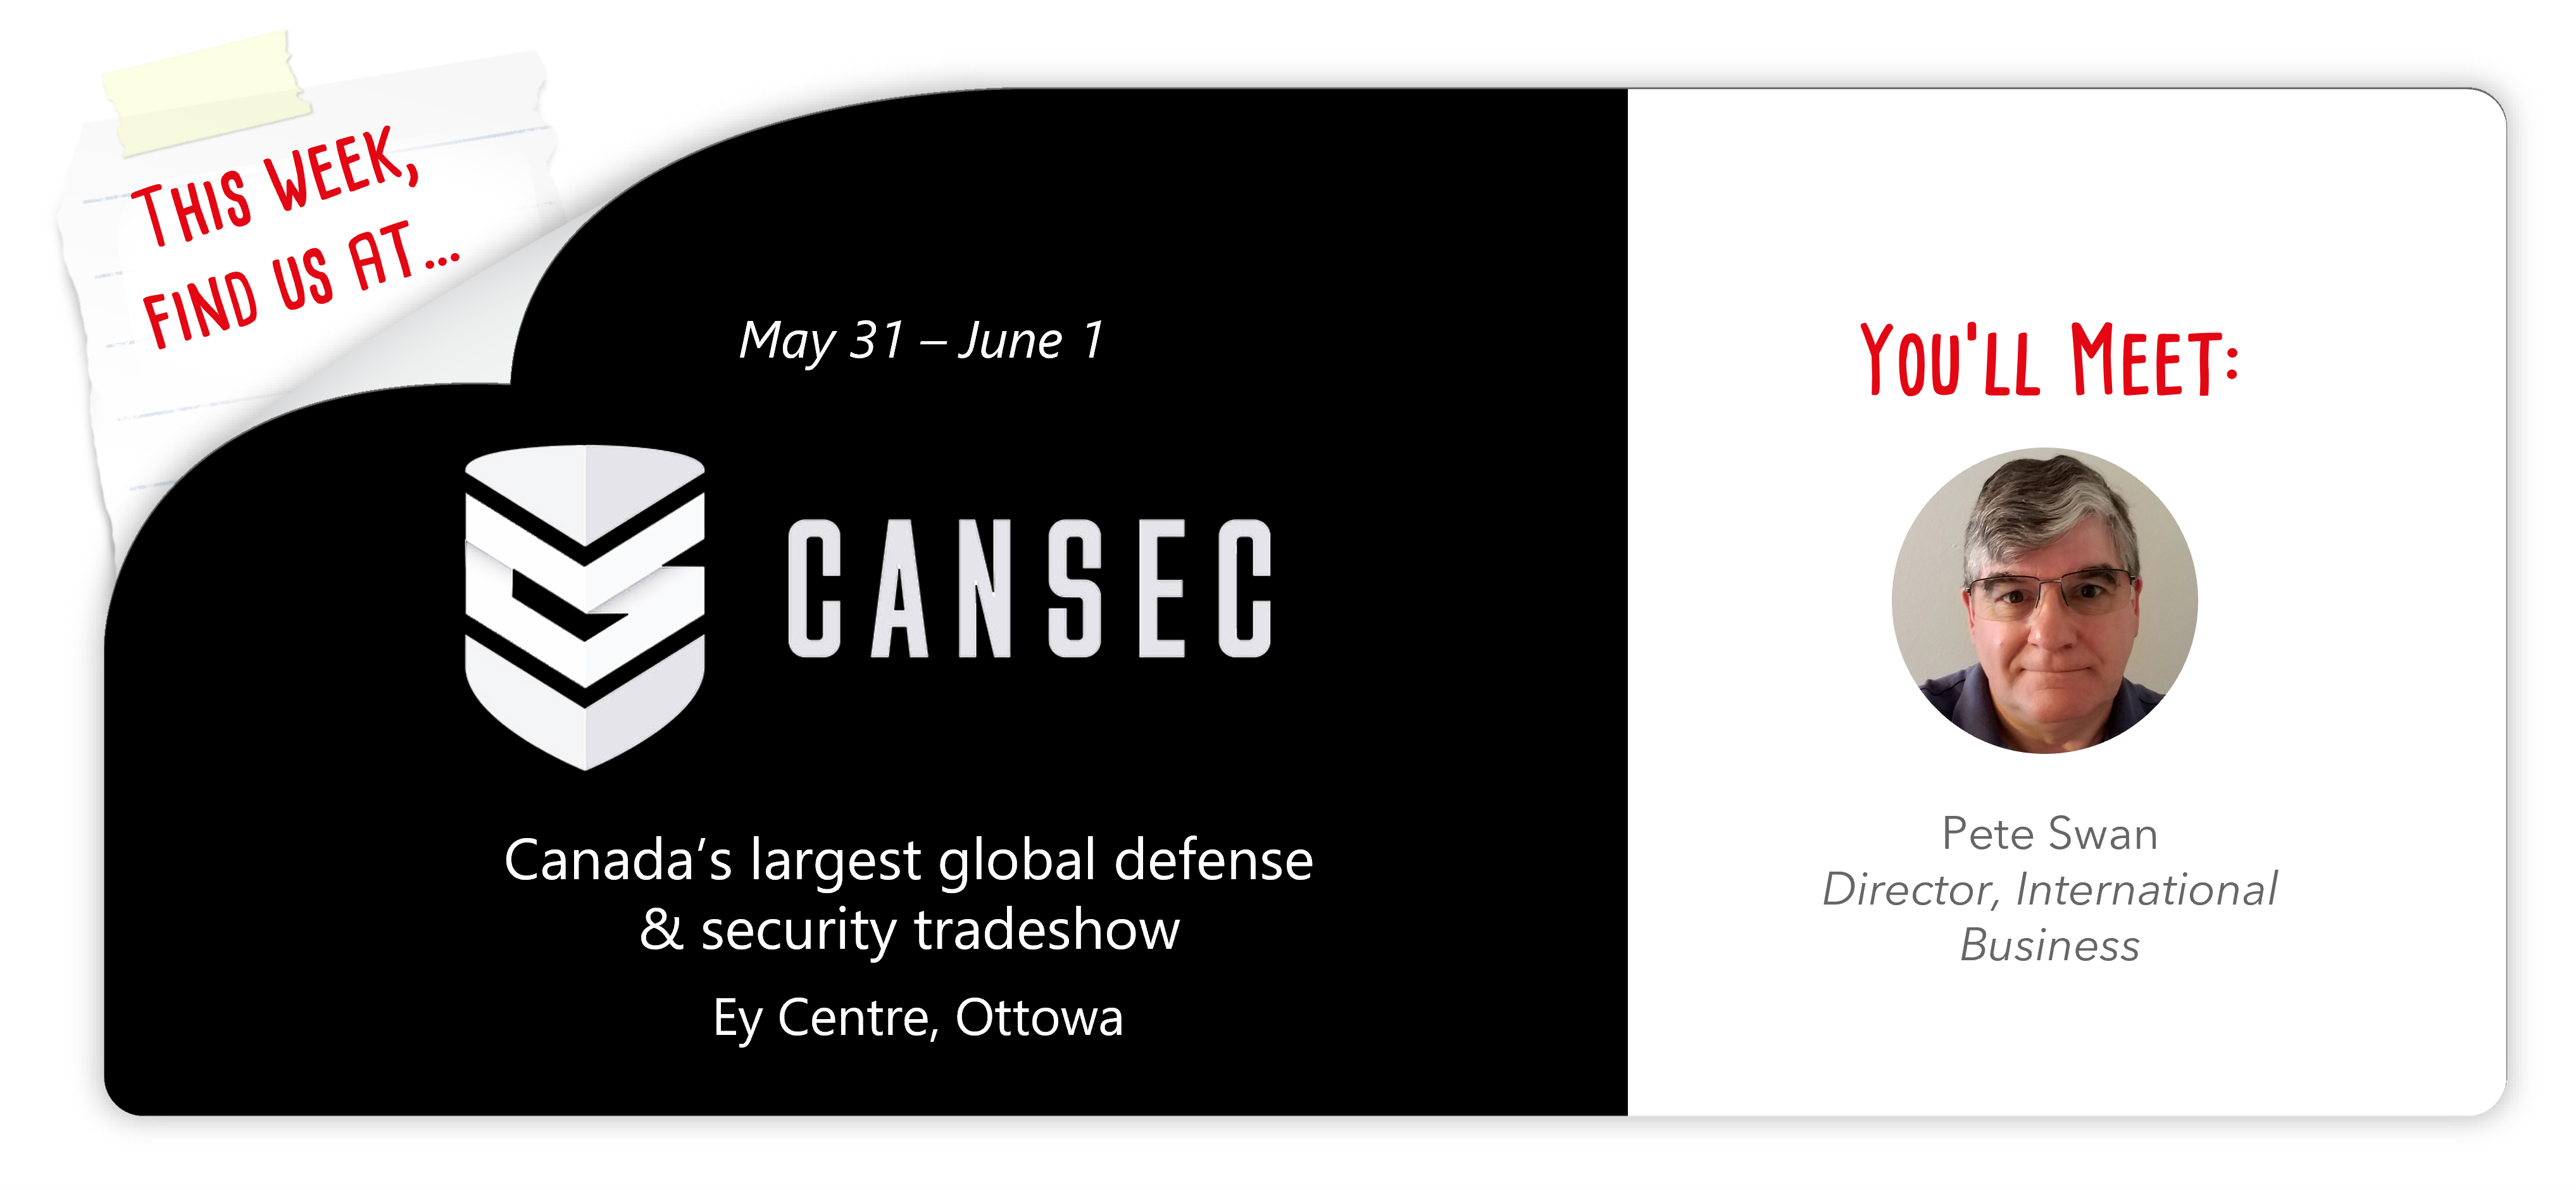 CANSEC event